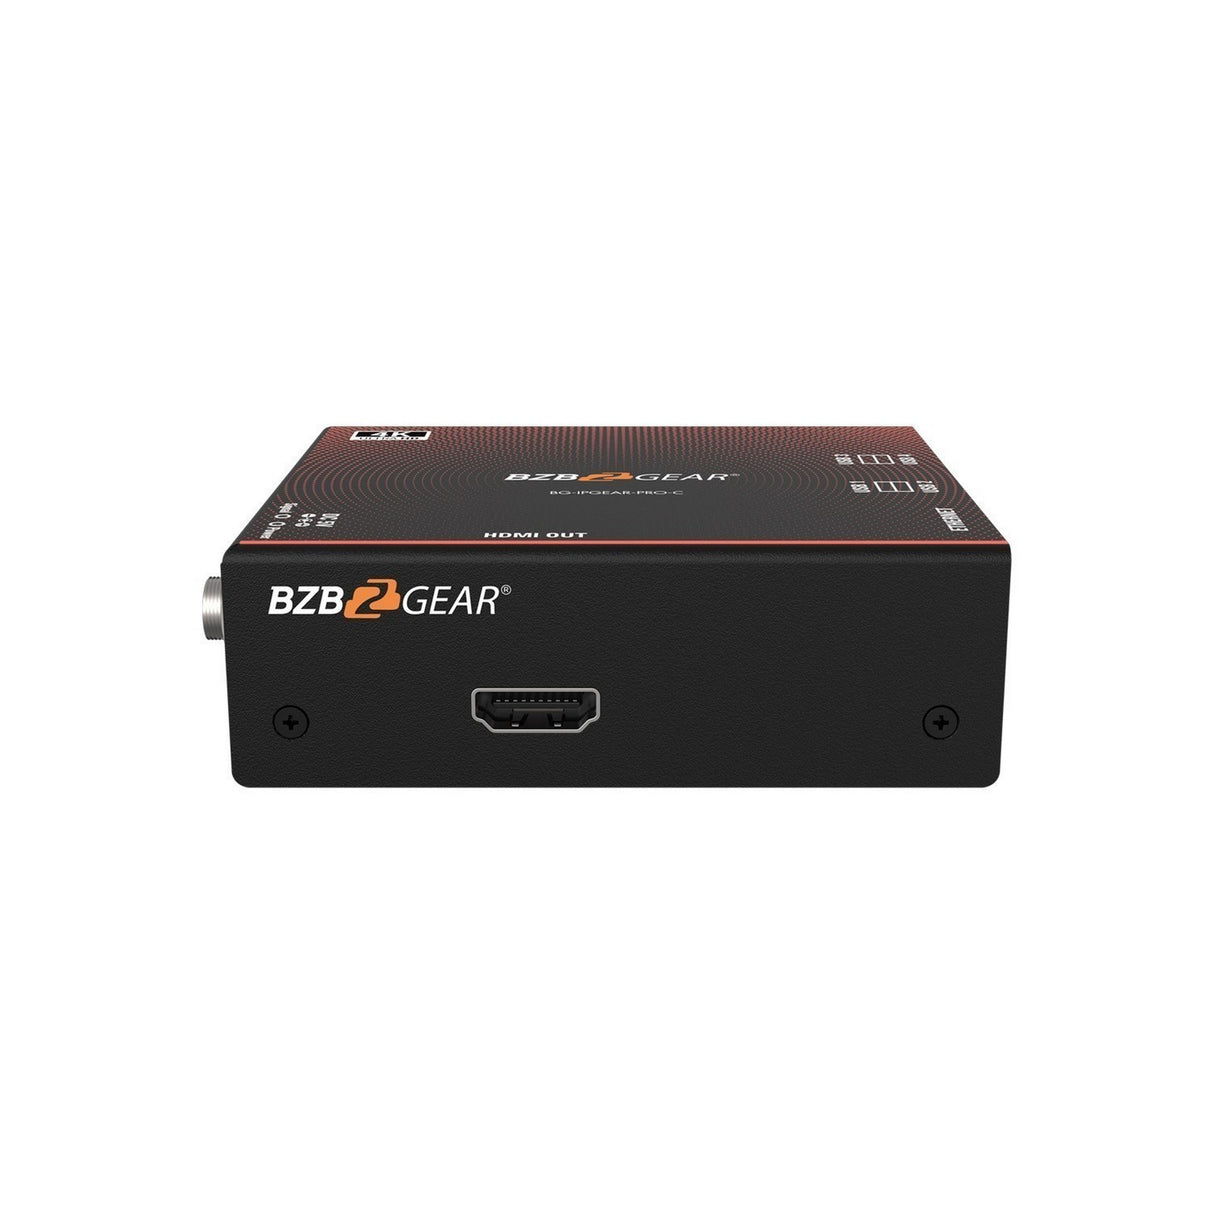 BZBGEAR BG-IPGEAR-PRO-C Smart Controller for IPGEAR-PRO HDMI over IP series